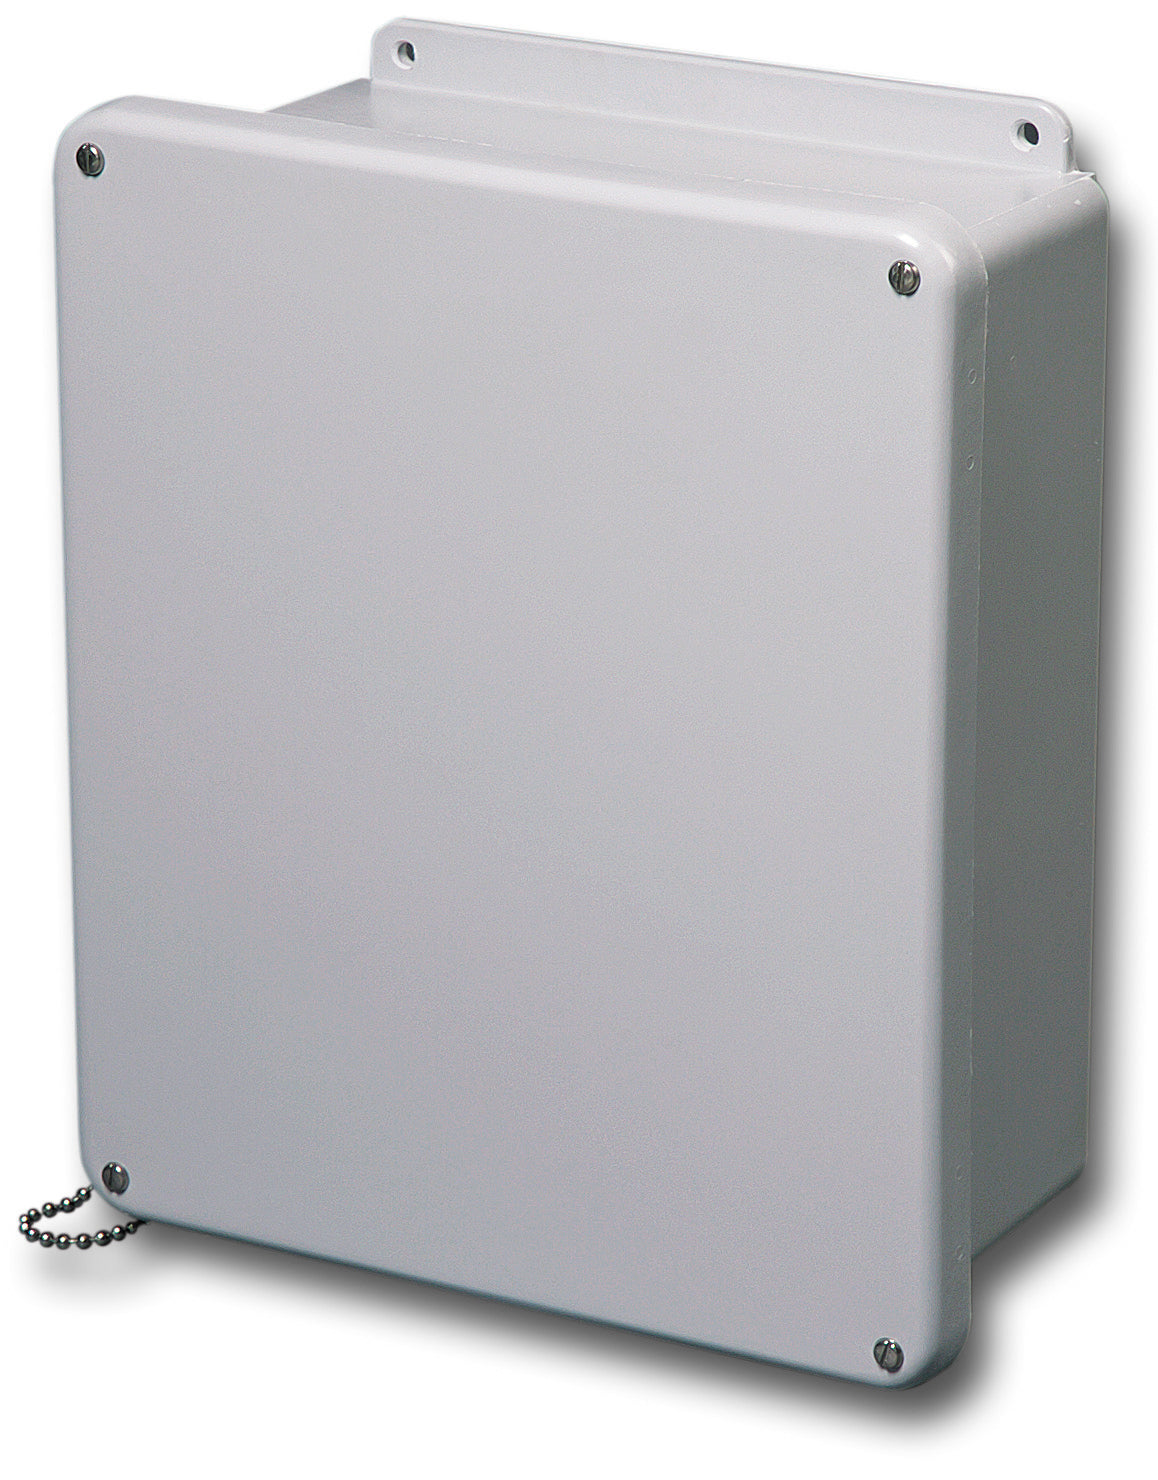 N4X   FG   SC Series     Fiberglass Enclosures with Lift   Off Screw Cover and Stainless Steel Cover Screws     Includes Cover Chain